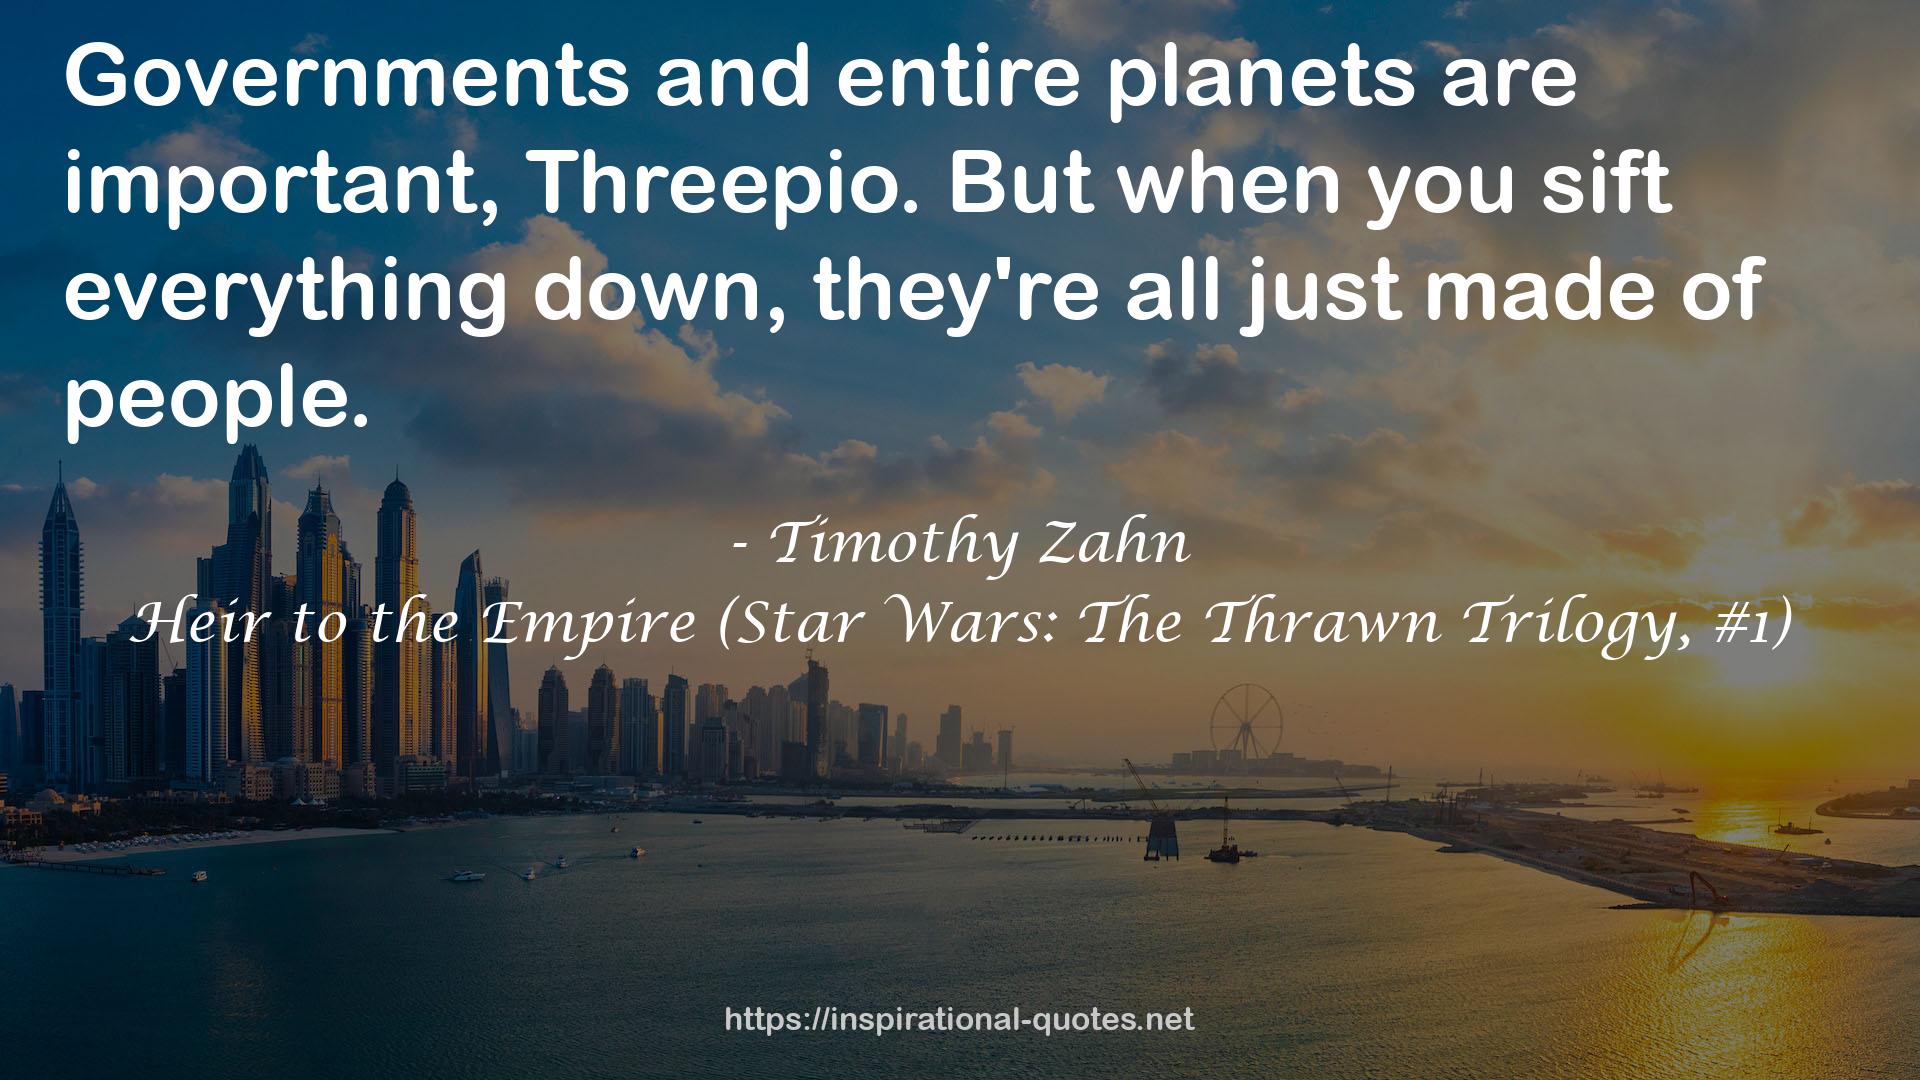 entire planets  QUOTES